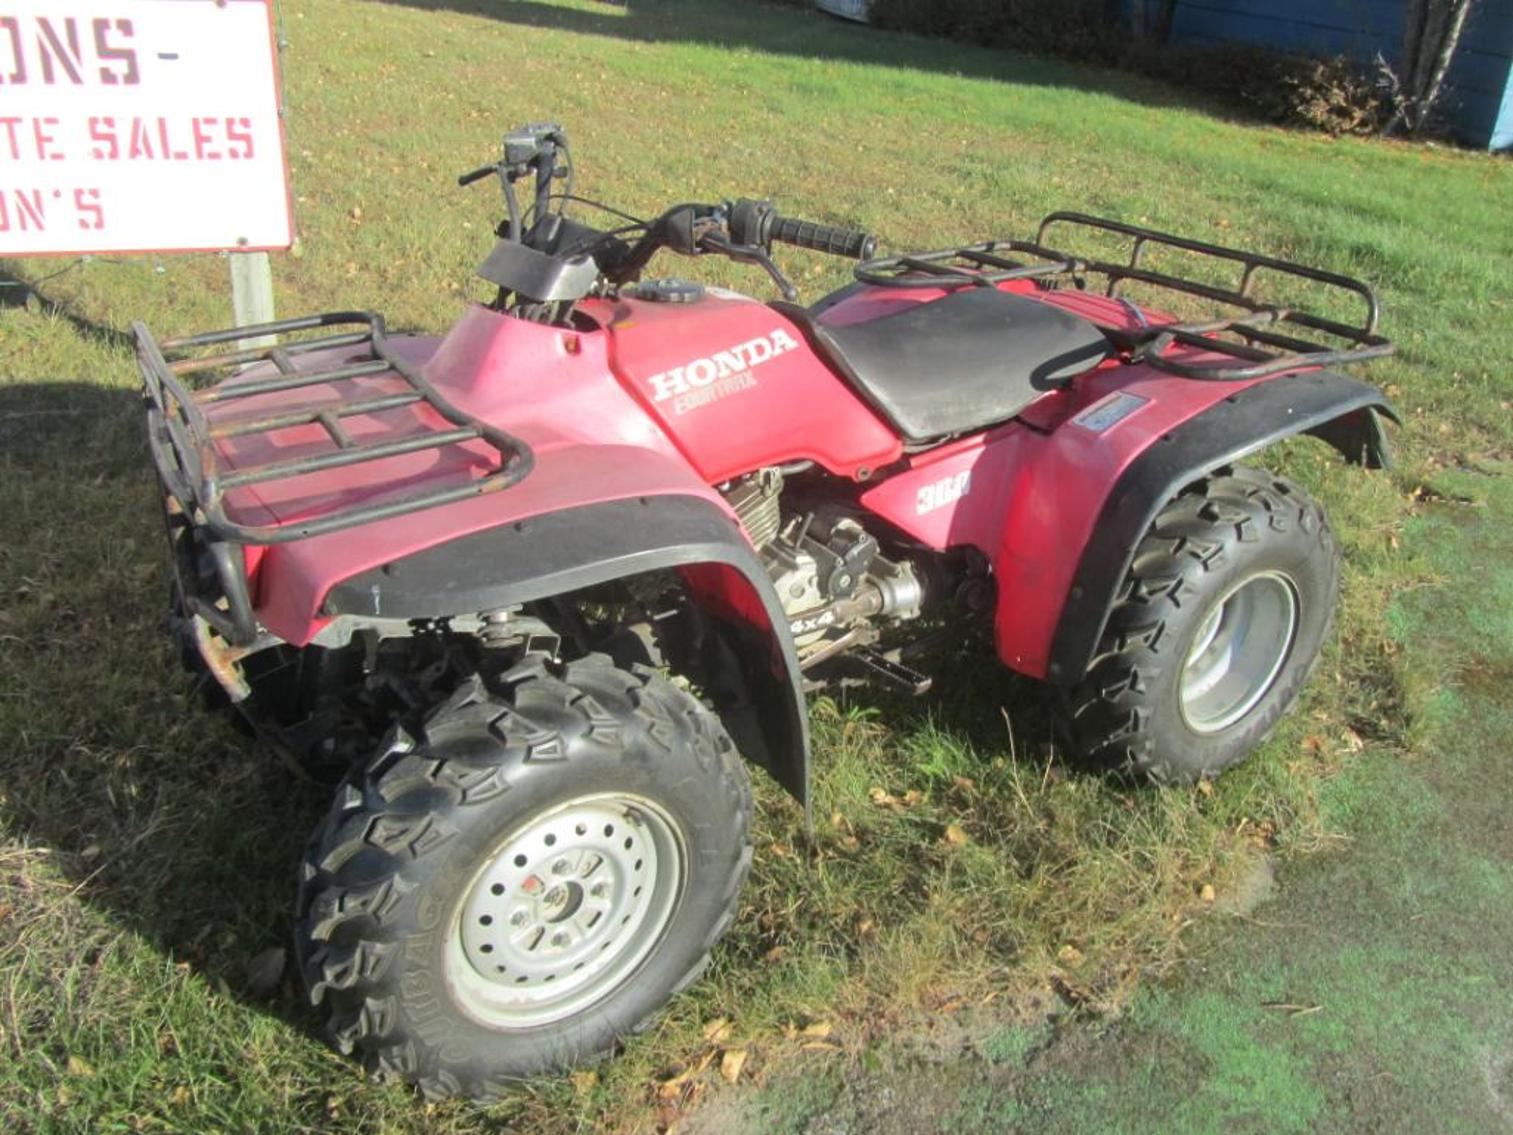 Ideal Corners November Consignment Auction